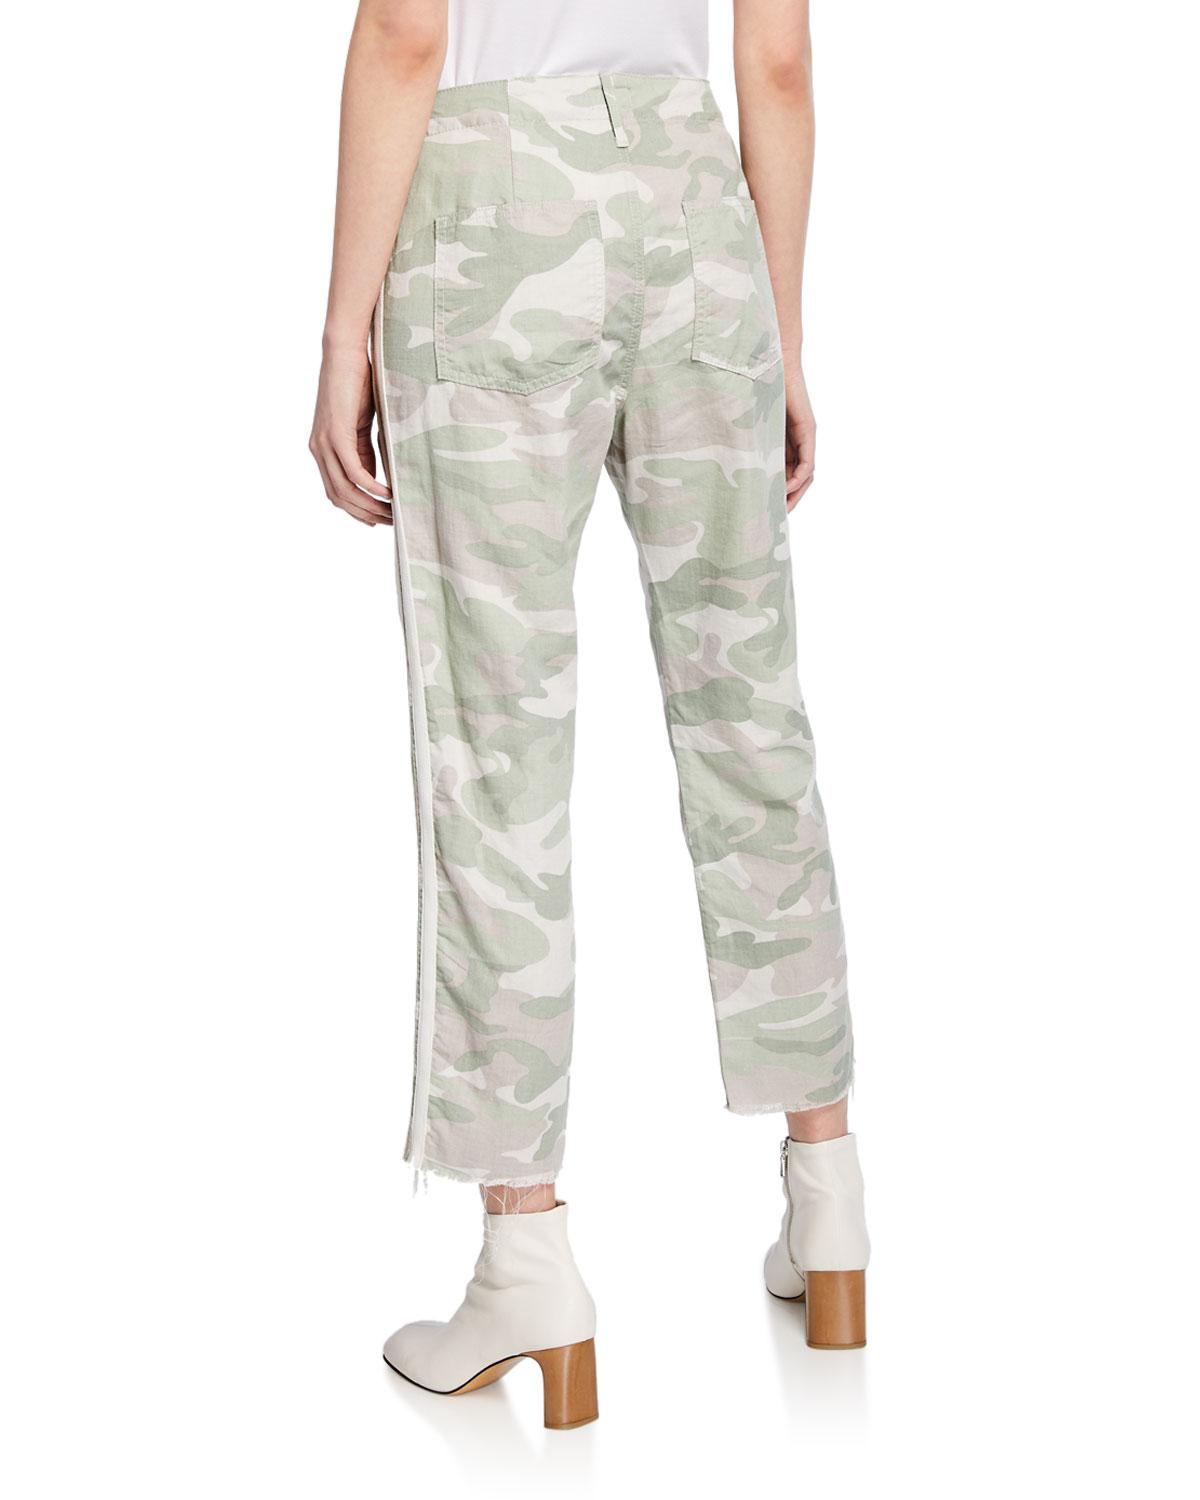 mother cargo pants